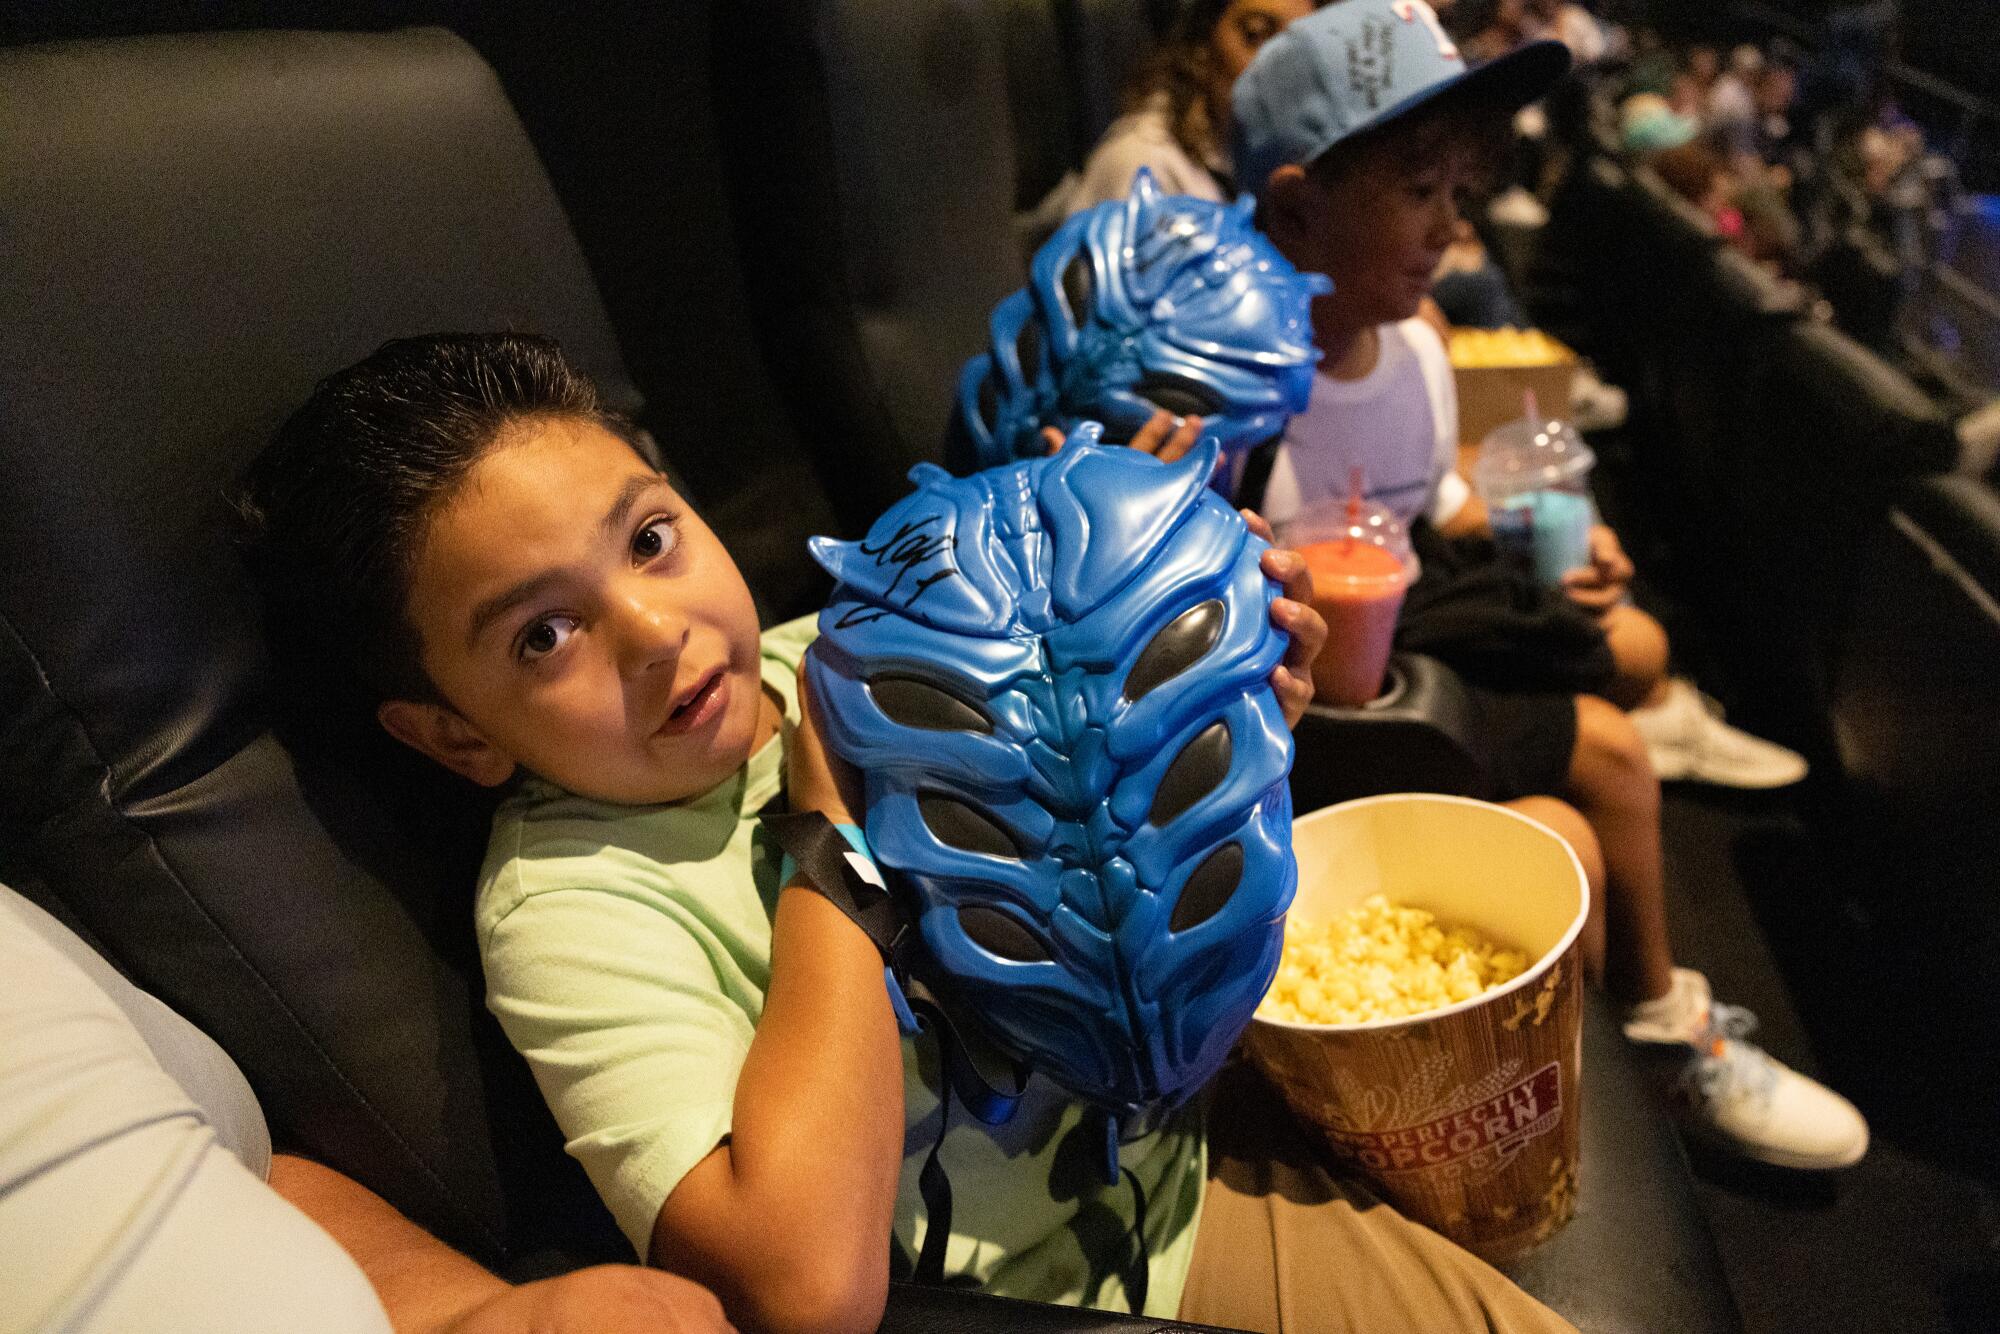 A child holds a "Blue Beetle" backpack.